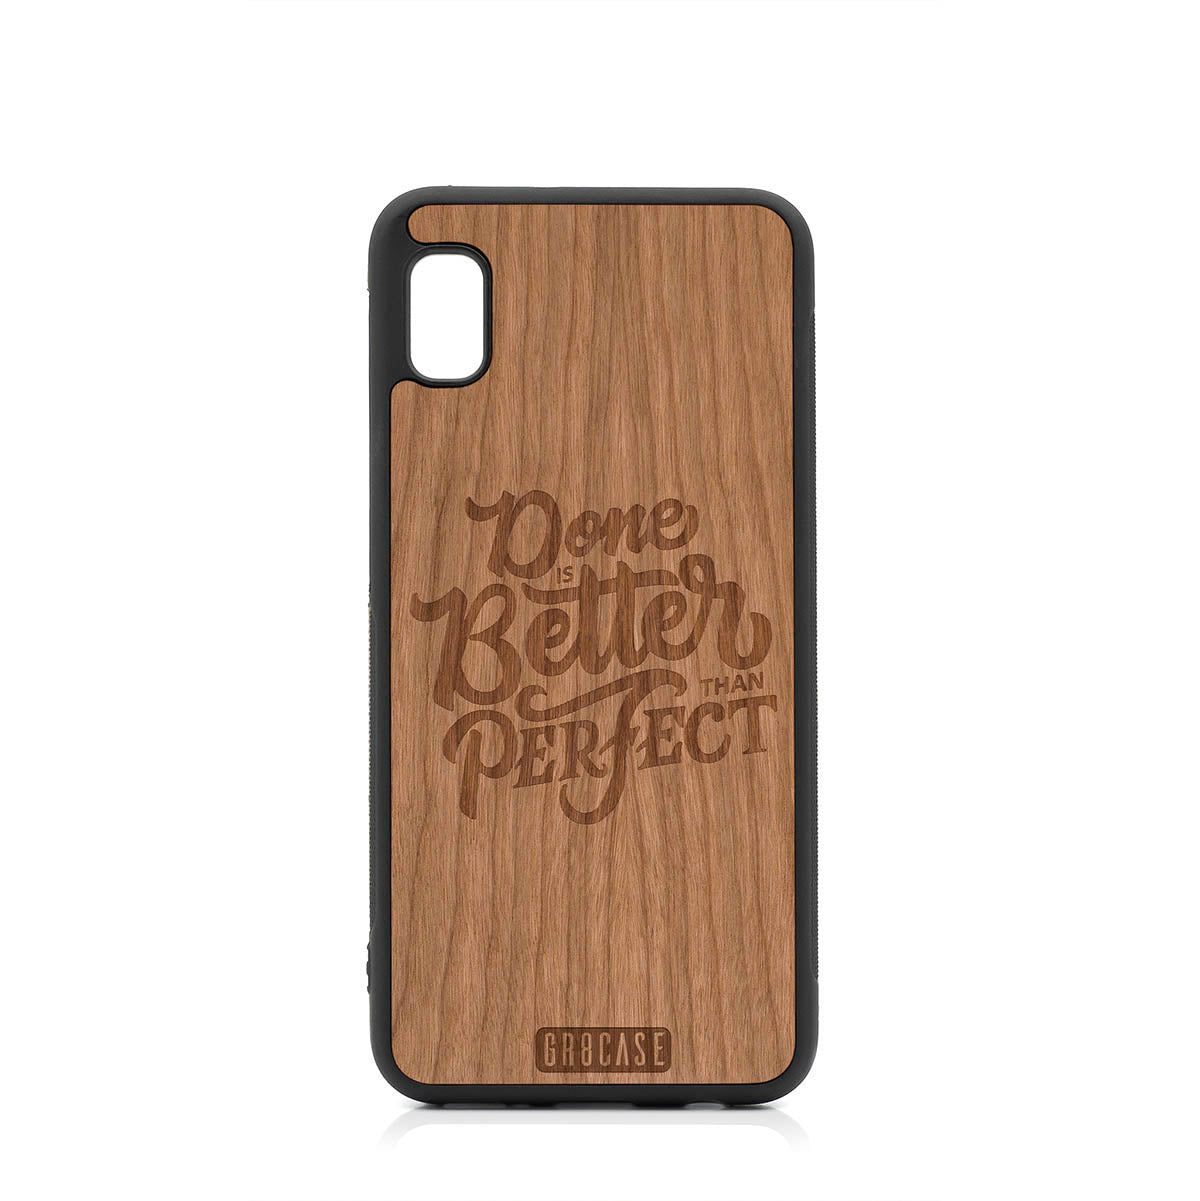 Done Is Better Than Perfect Design Wood Case For Samsung Galaxy A10E by GR8CASE